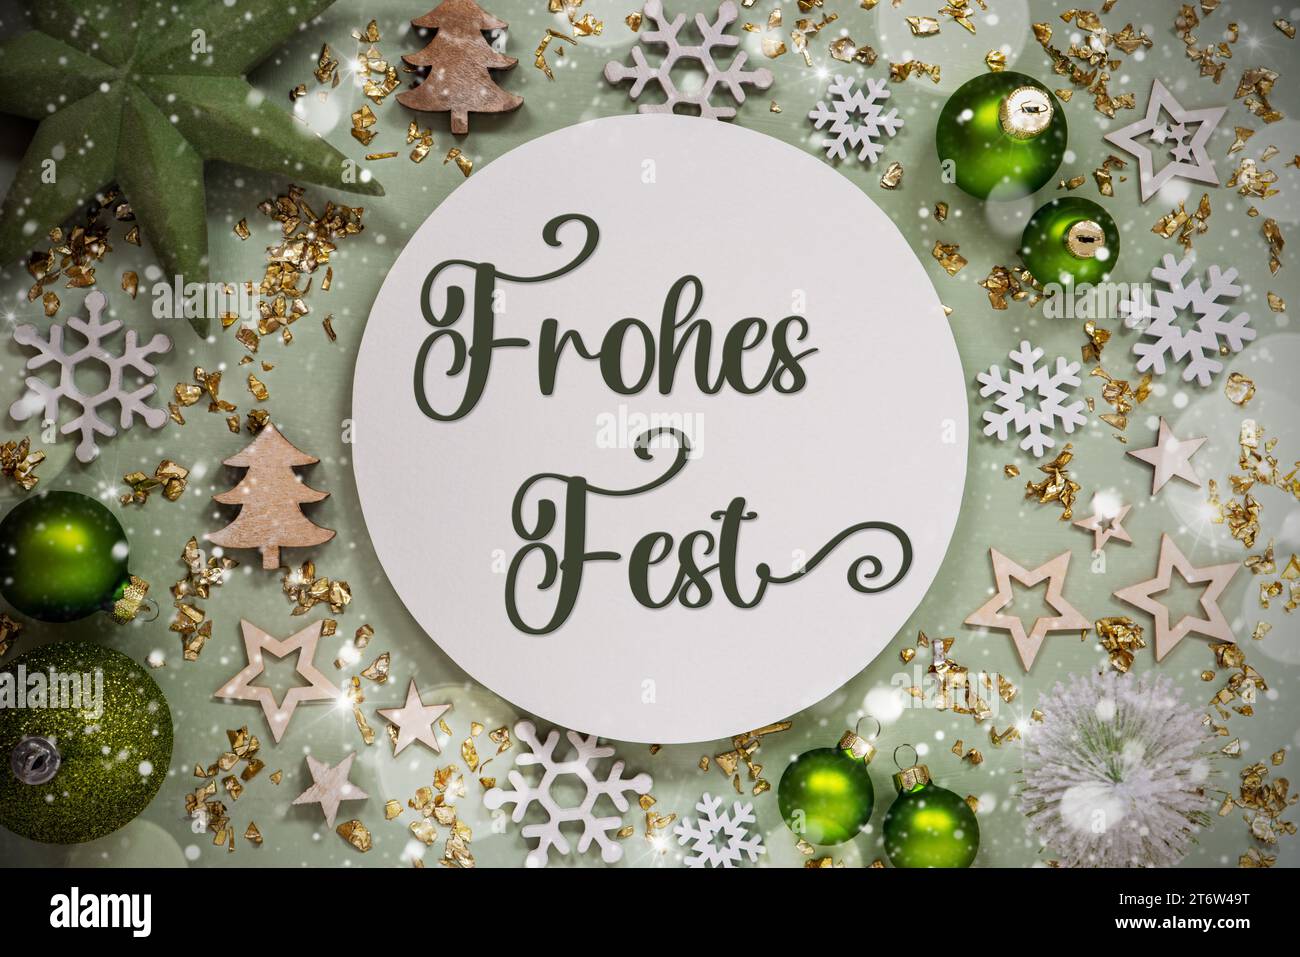 Text Frohes Fest, Means Happy Holidays, Green Christmas Decor, Snow Stock Photo